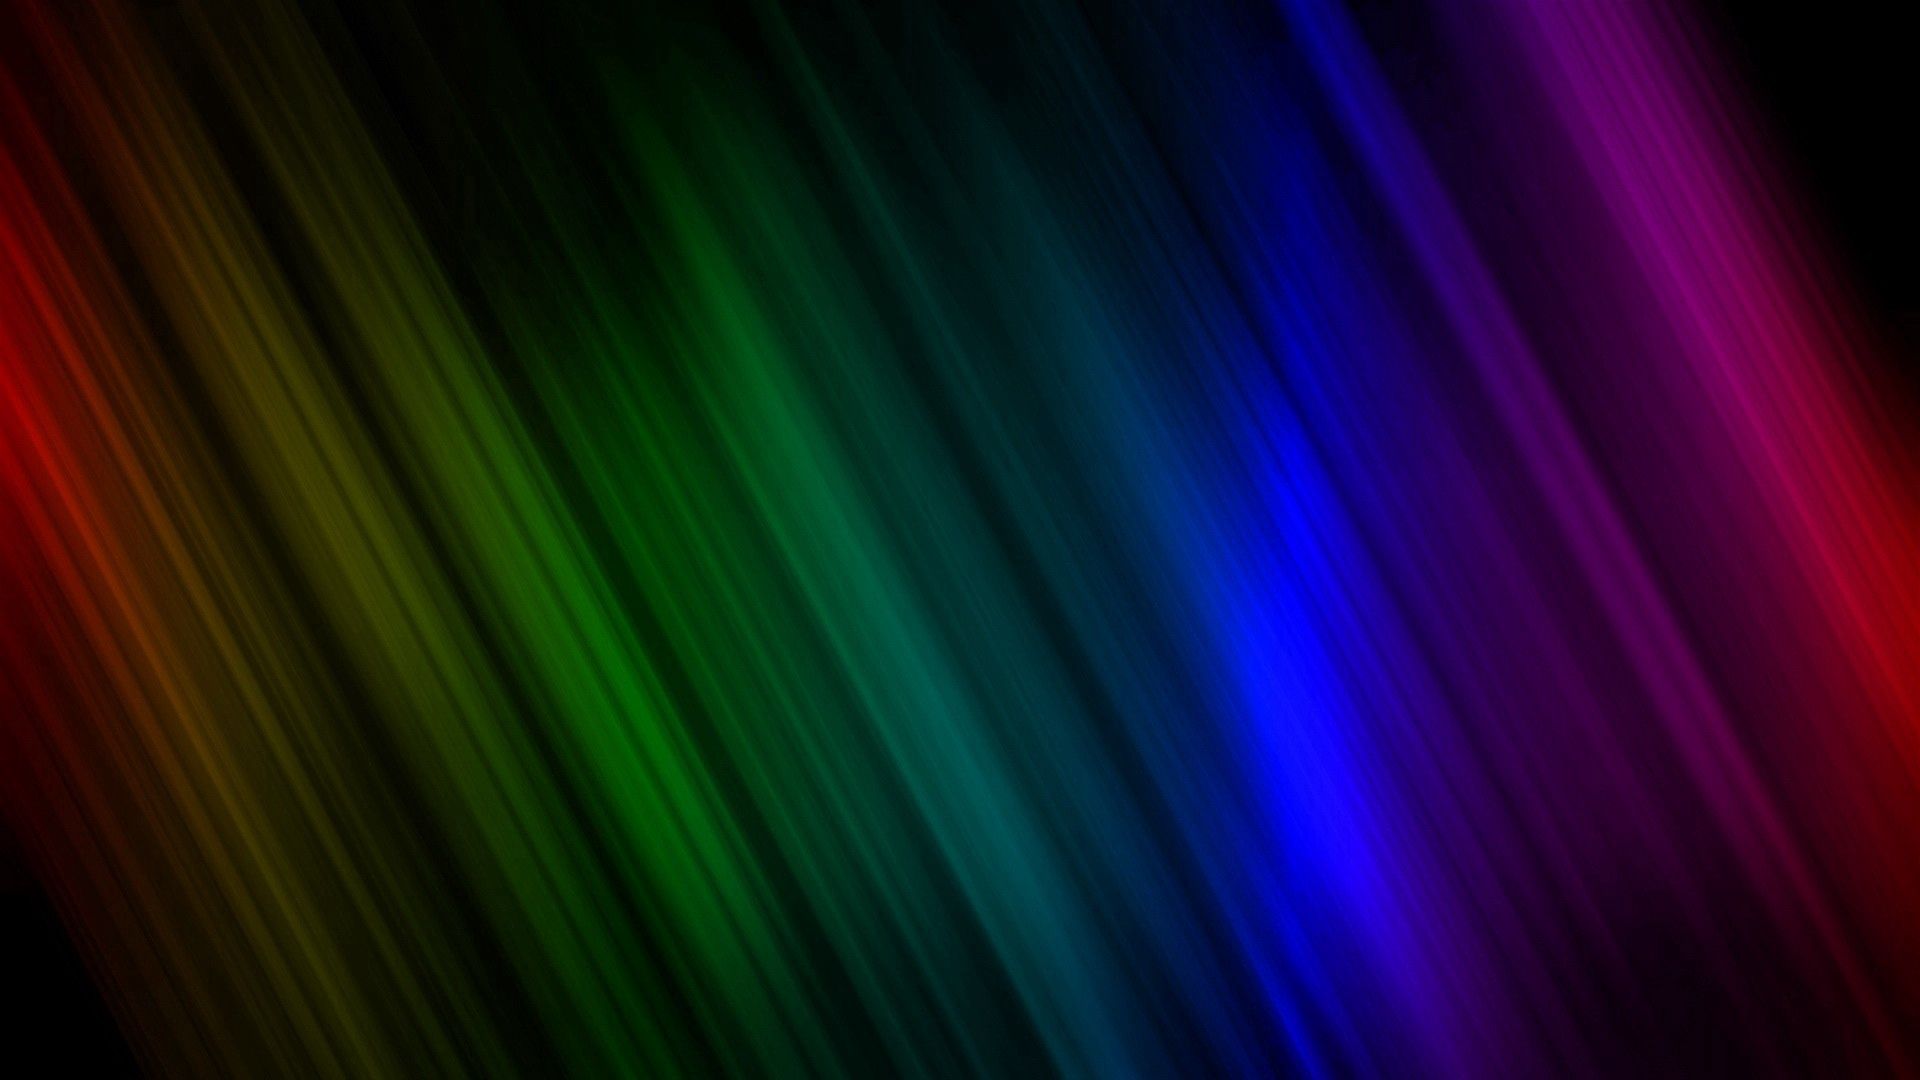 New Lock Screen Wallpapers obliquely, abstract, multicolored, motley, lines